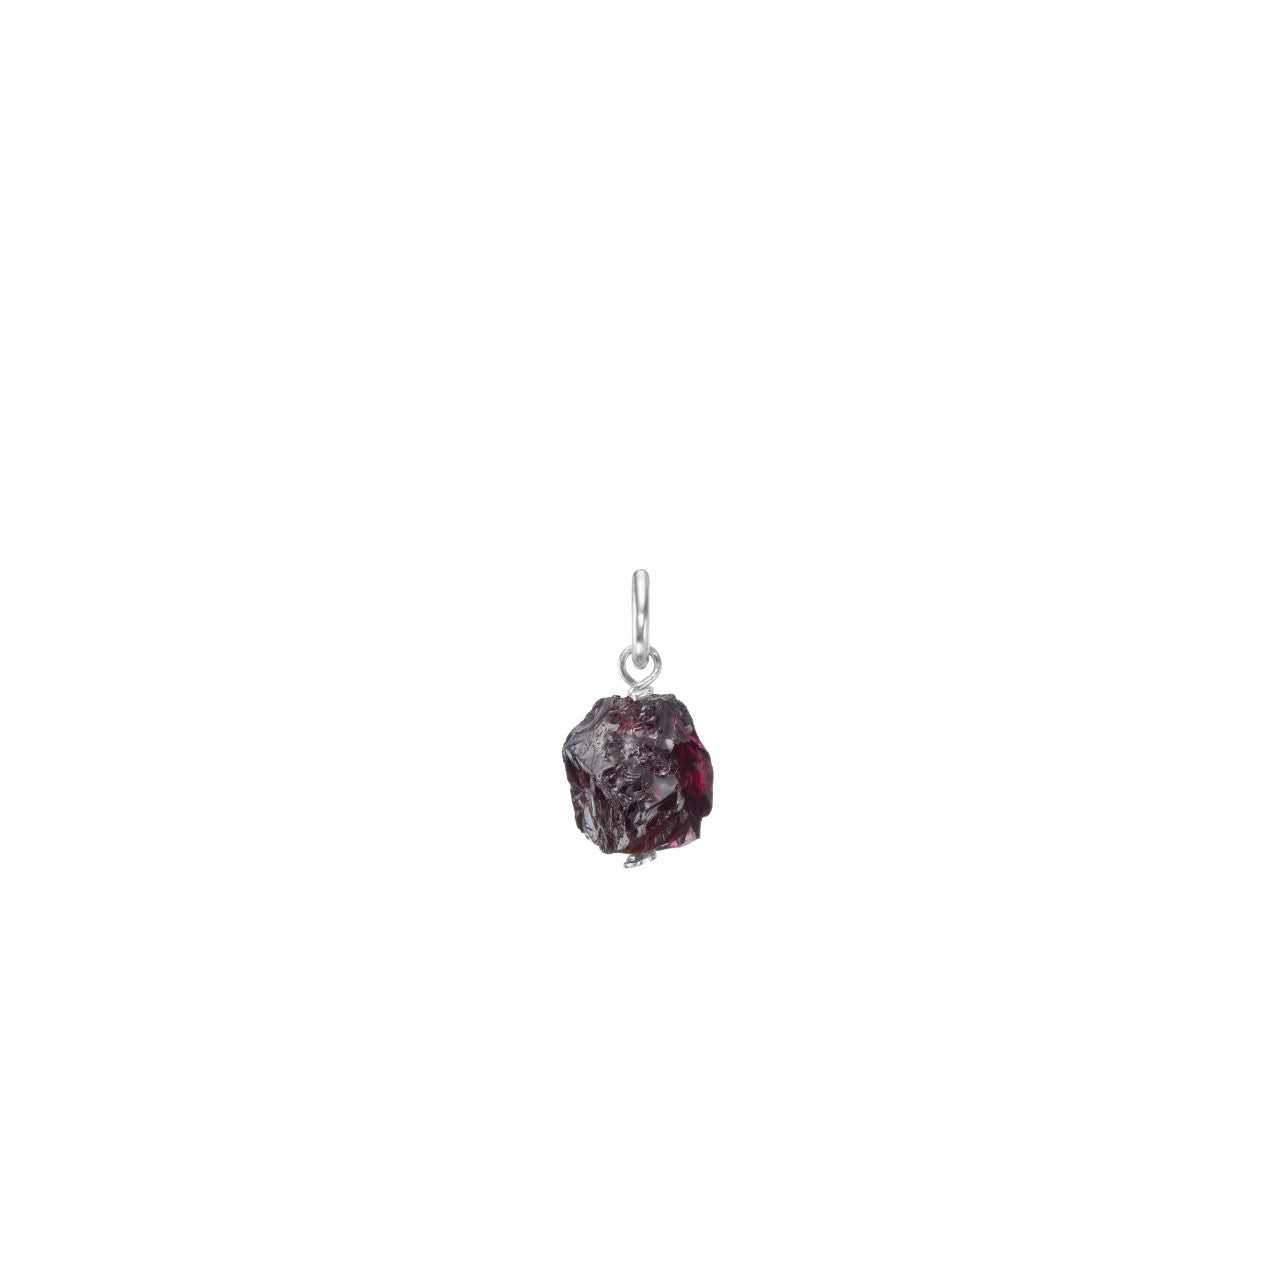 Load image into Gallery viewer, Additional Birthstone | Raw Threaded (Silver)
